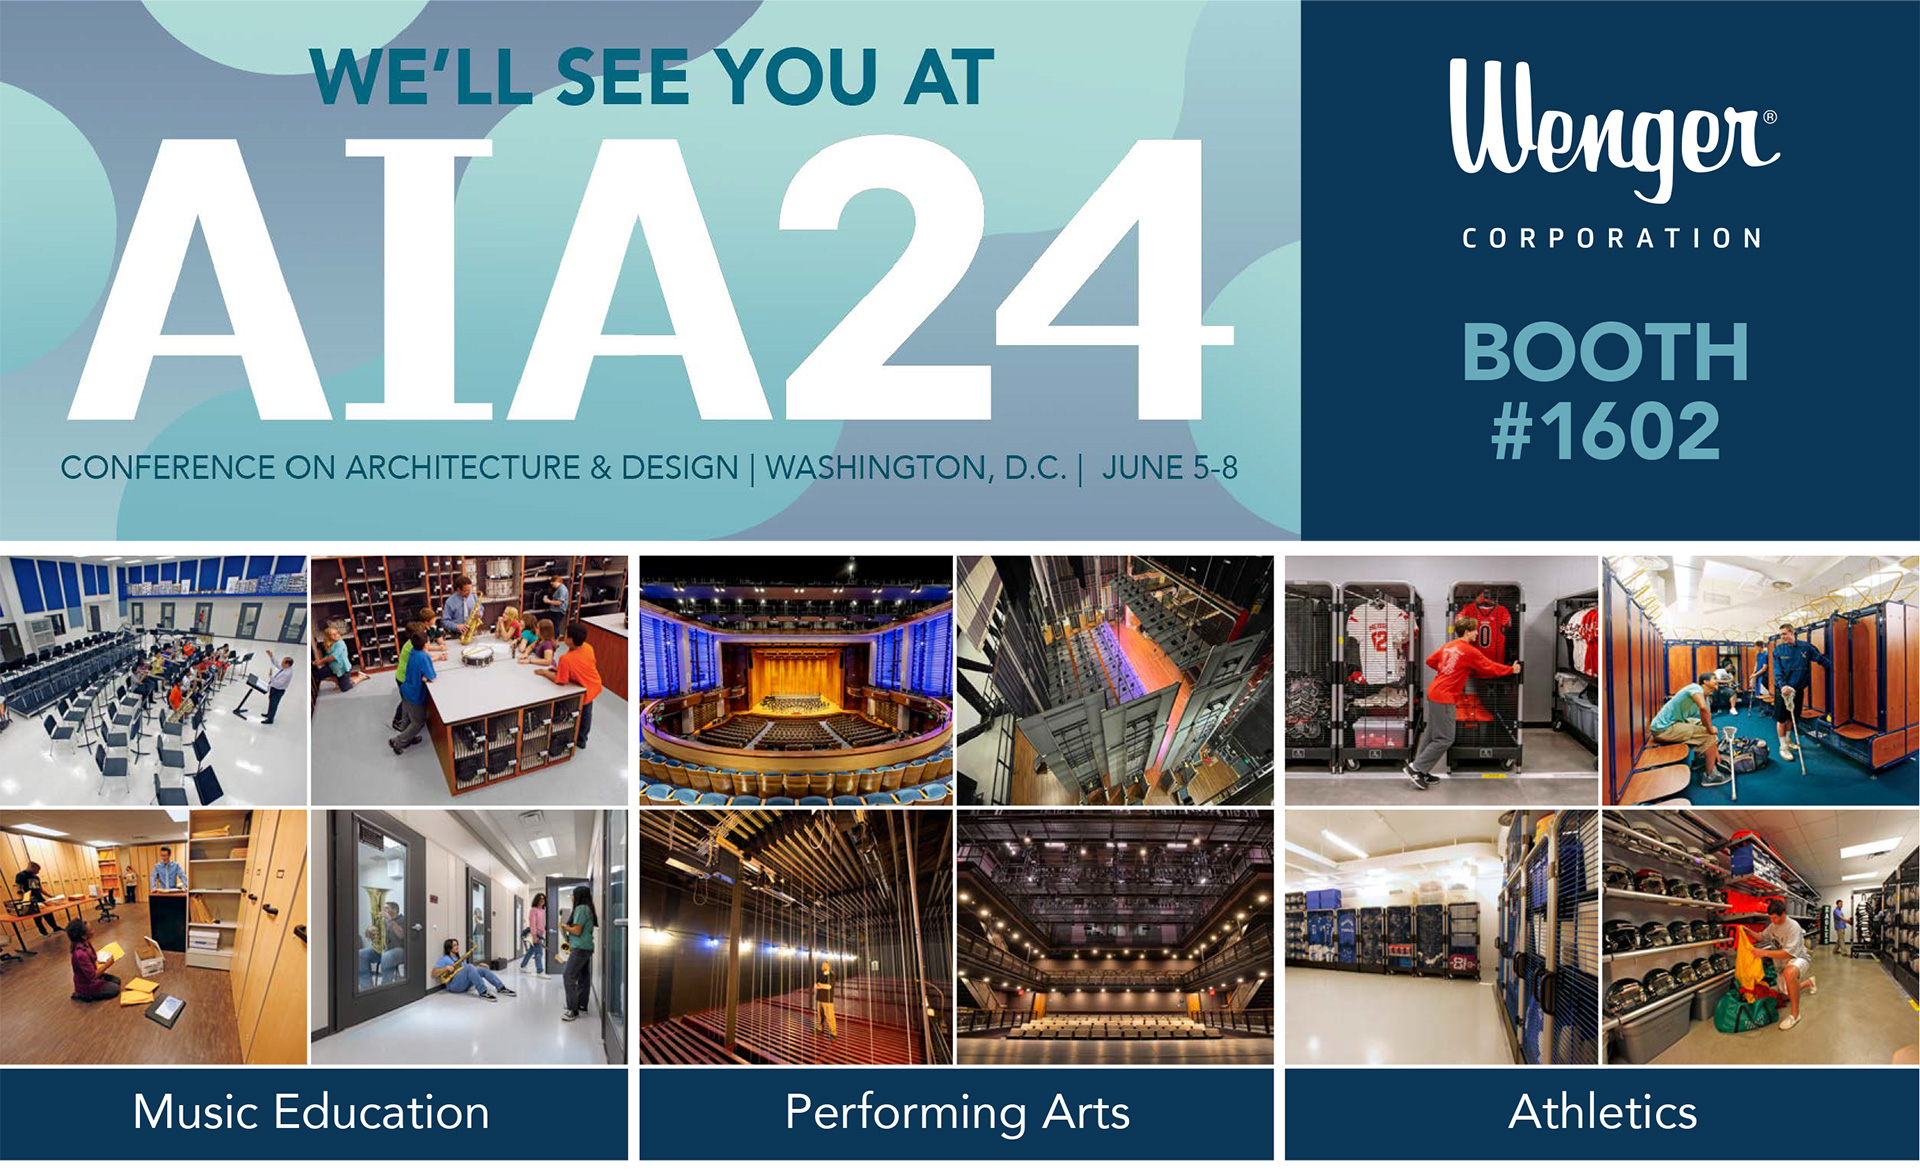 We'll see you at AIA24 - Booth #1602